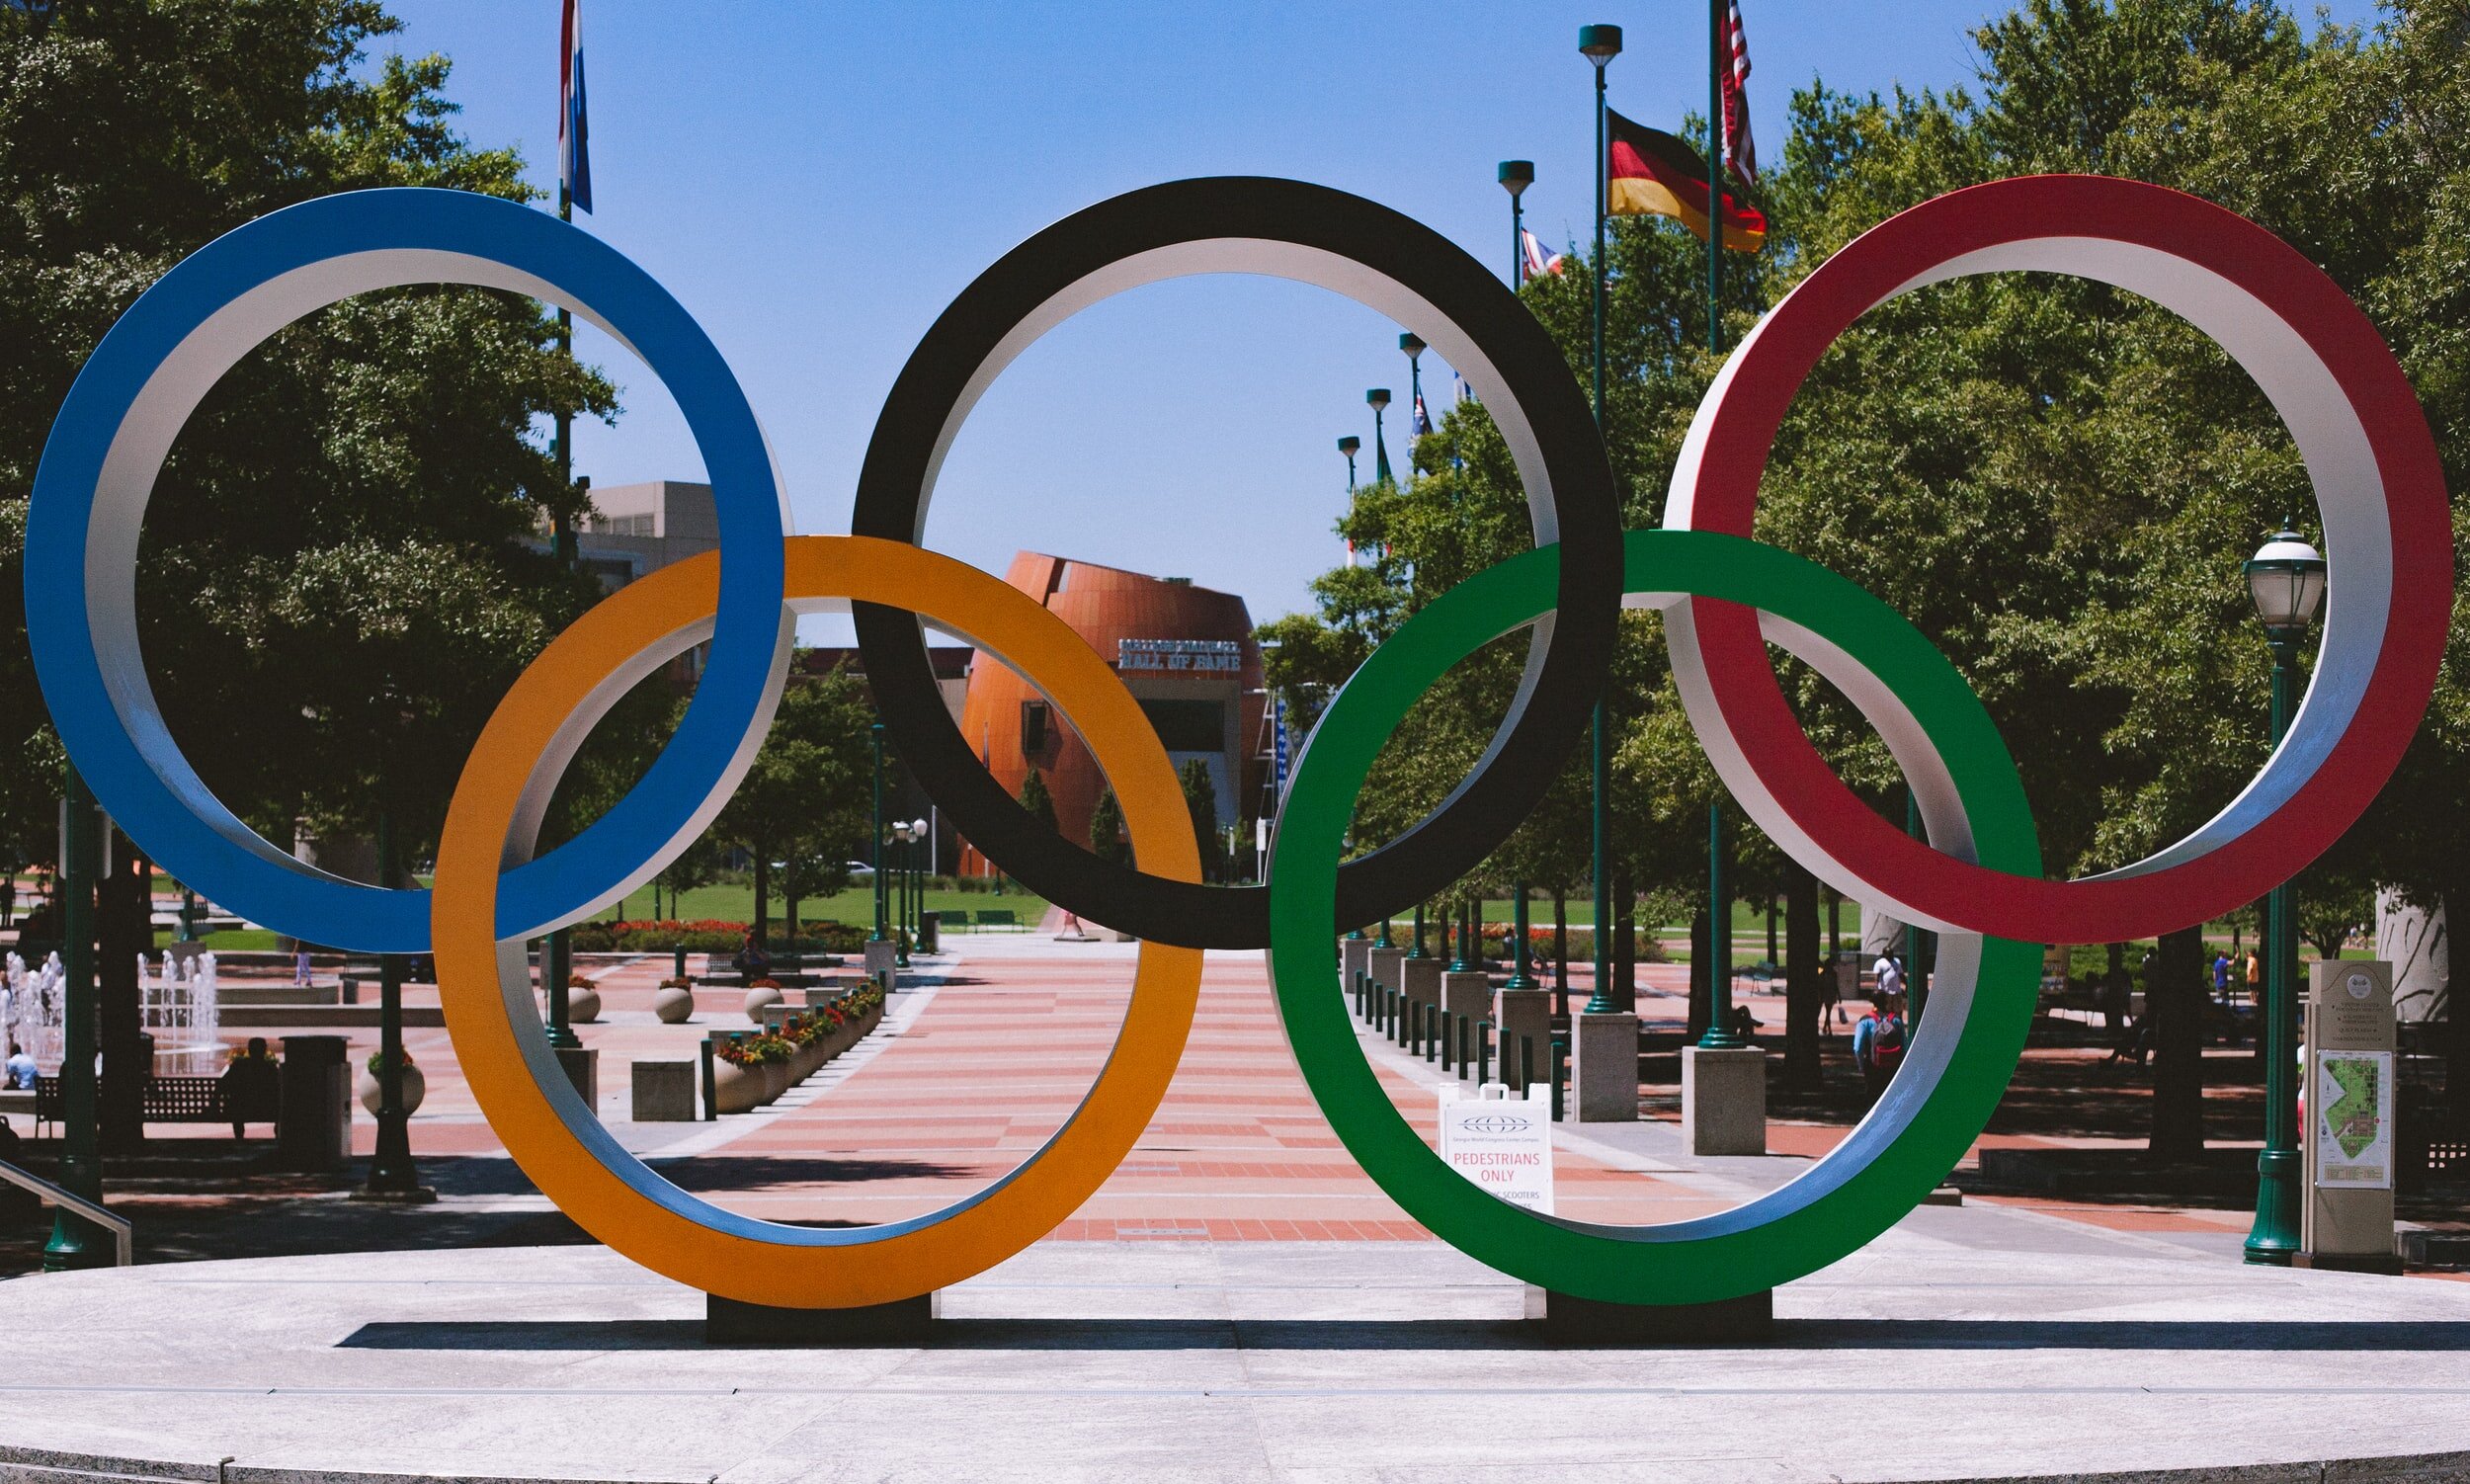 Design Lessons from the Olympics